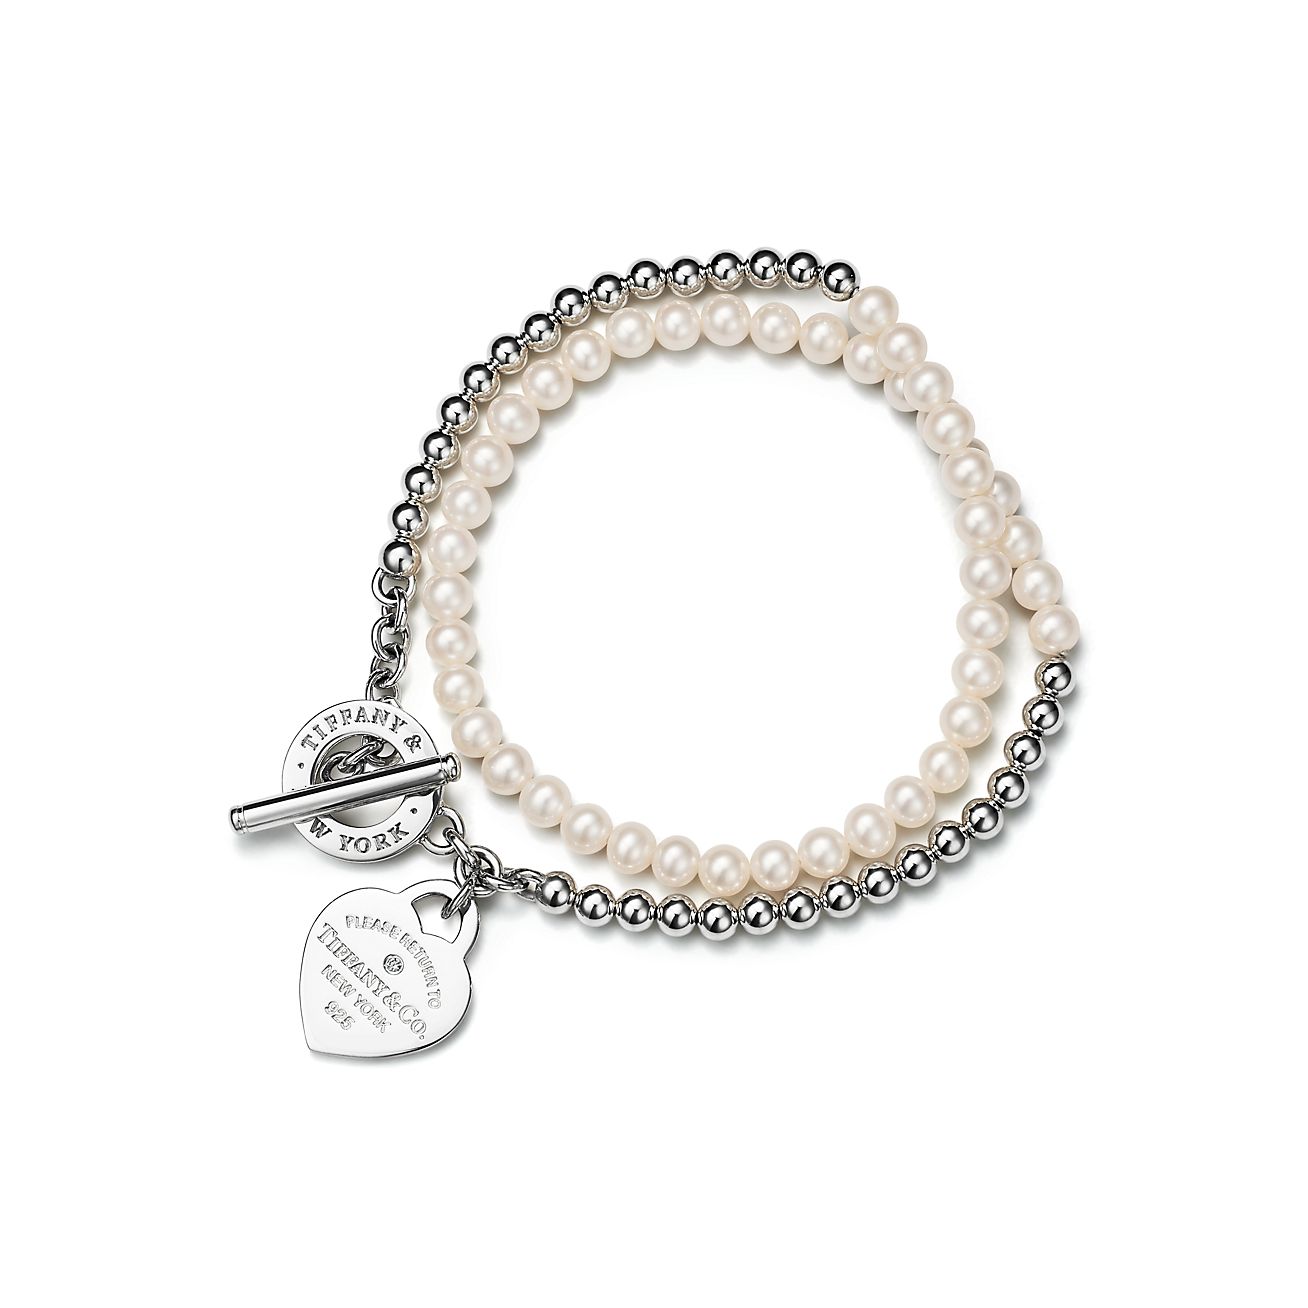 Return to Tiffany™ Wrap Bead Bracelet in Silver with Pearls and a Diamond,  Small